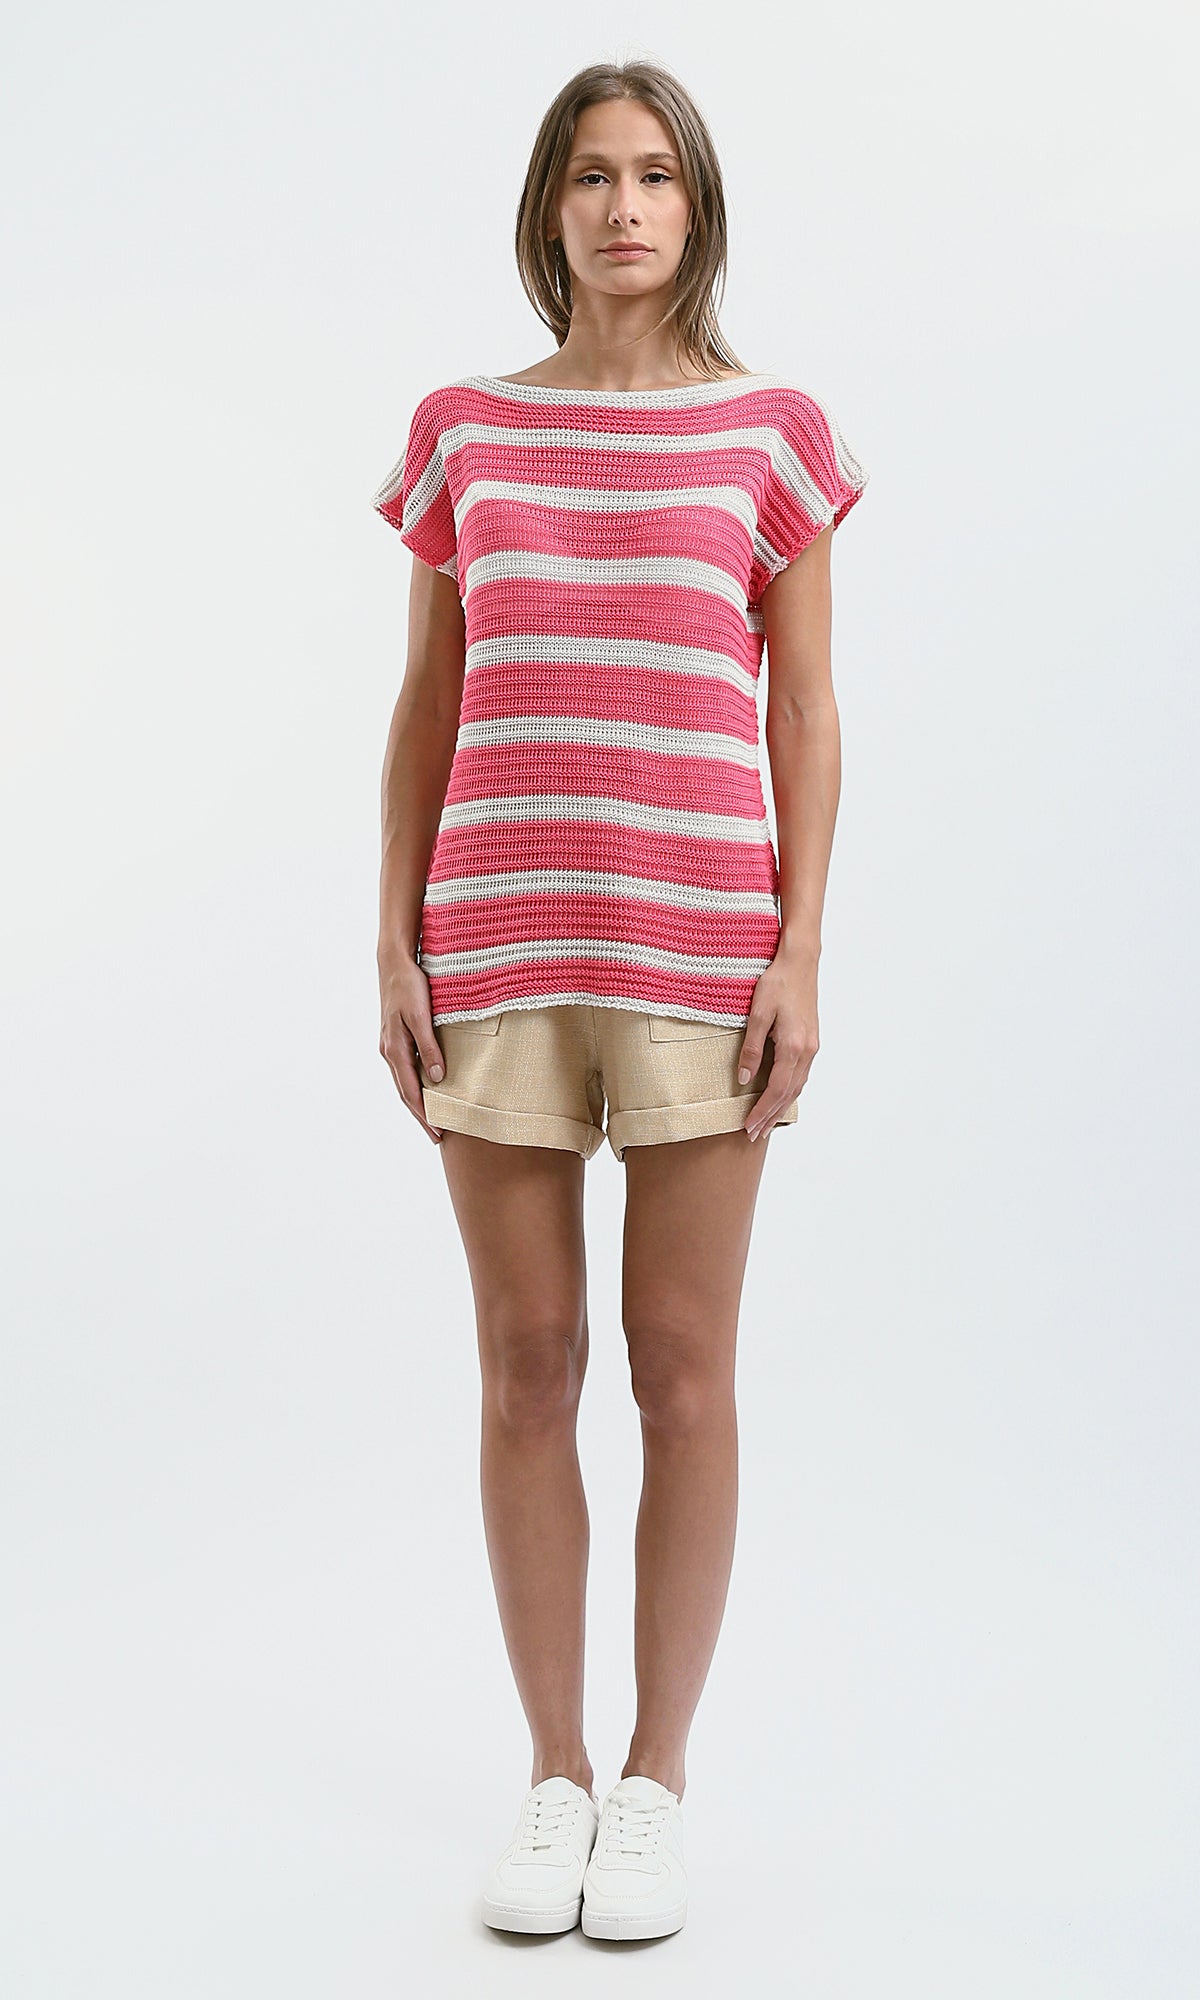 O182710 Trendy Striped Slip On Summer Top - Pink & White